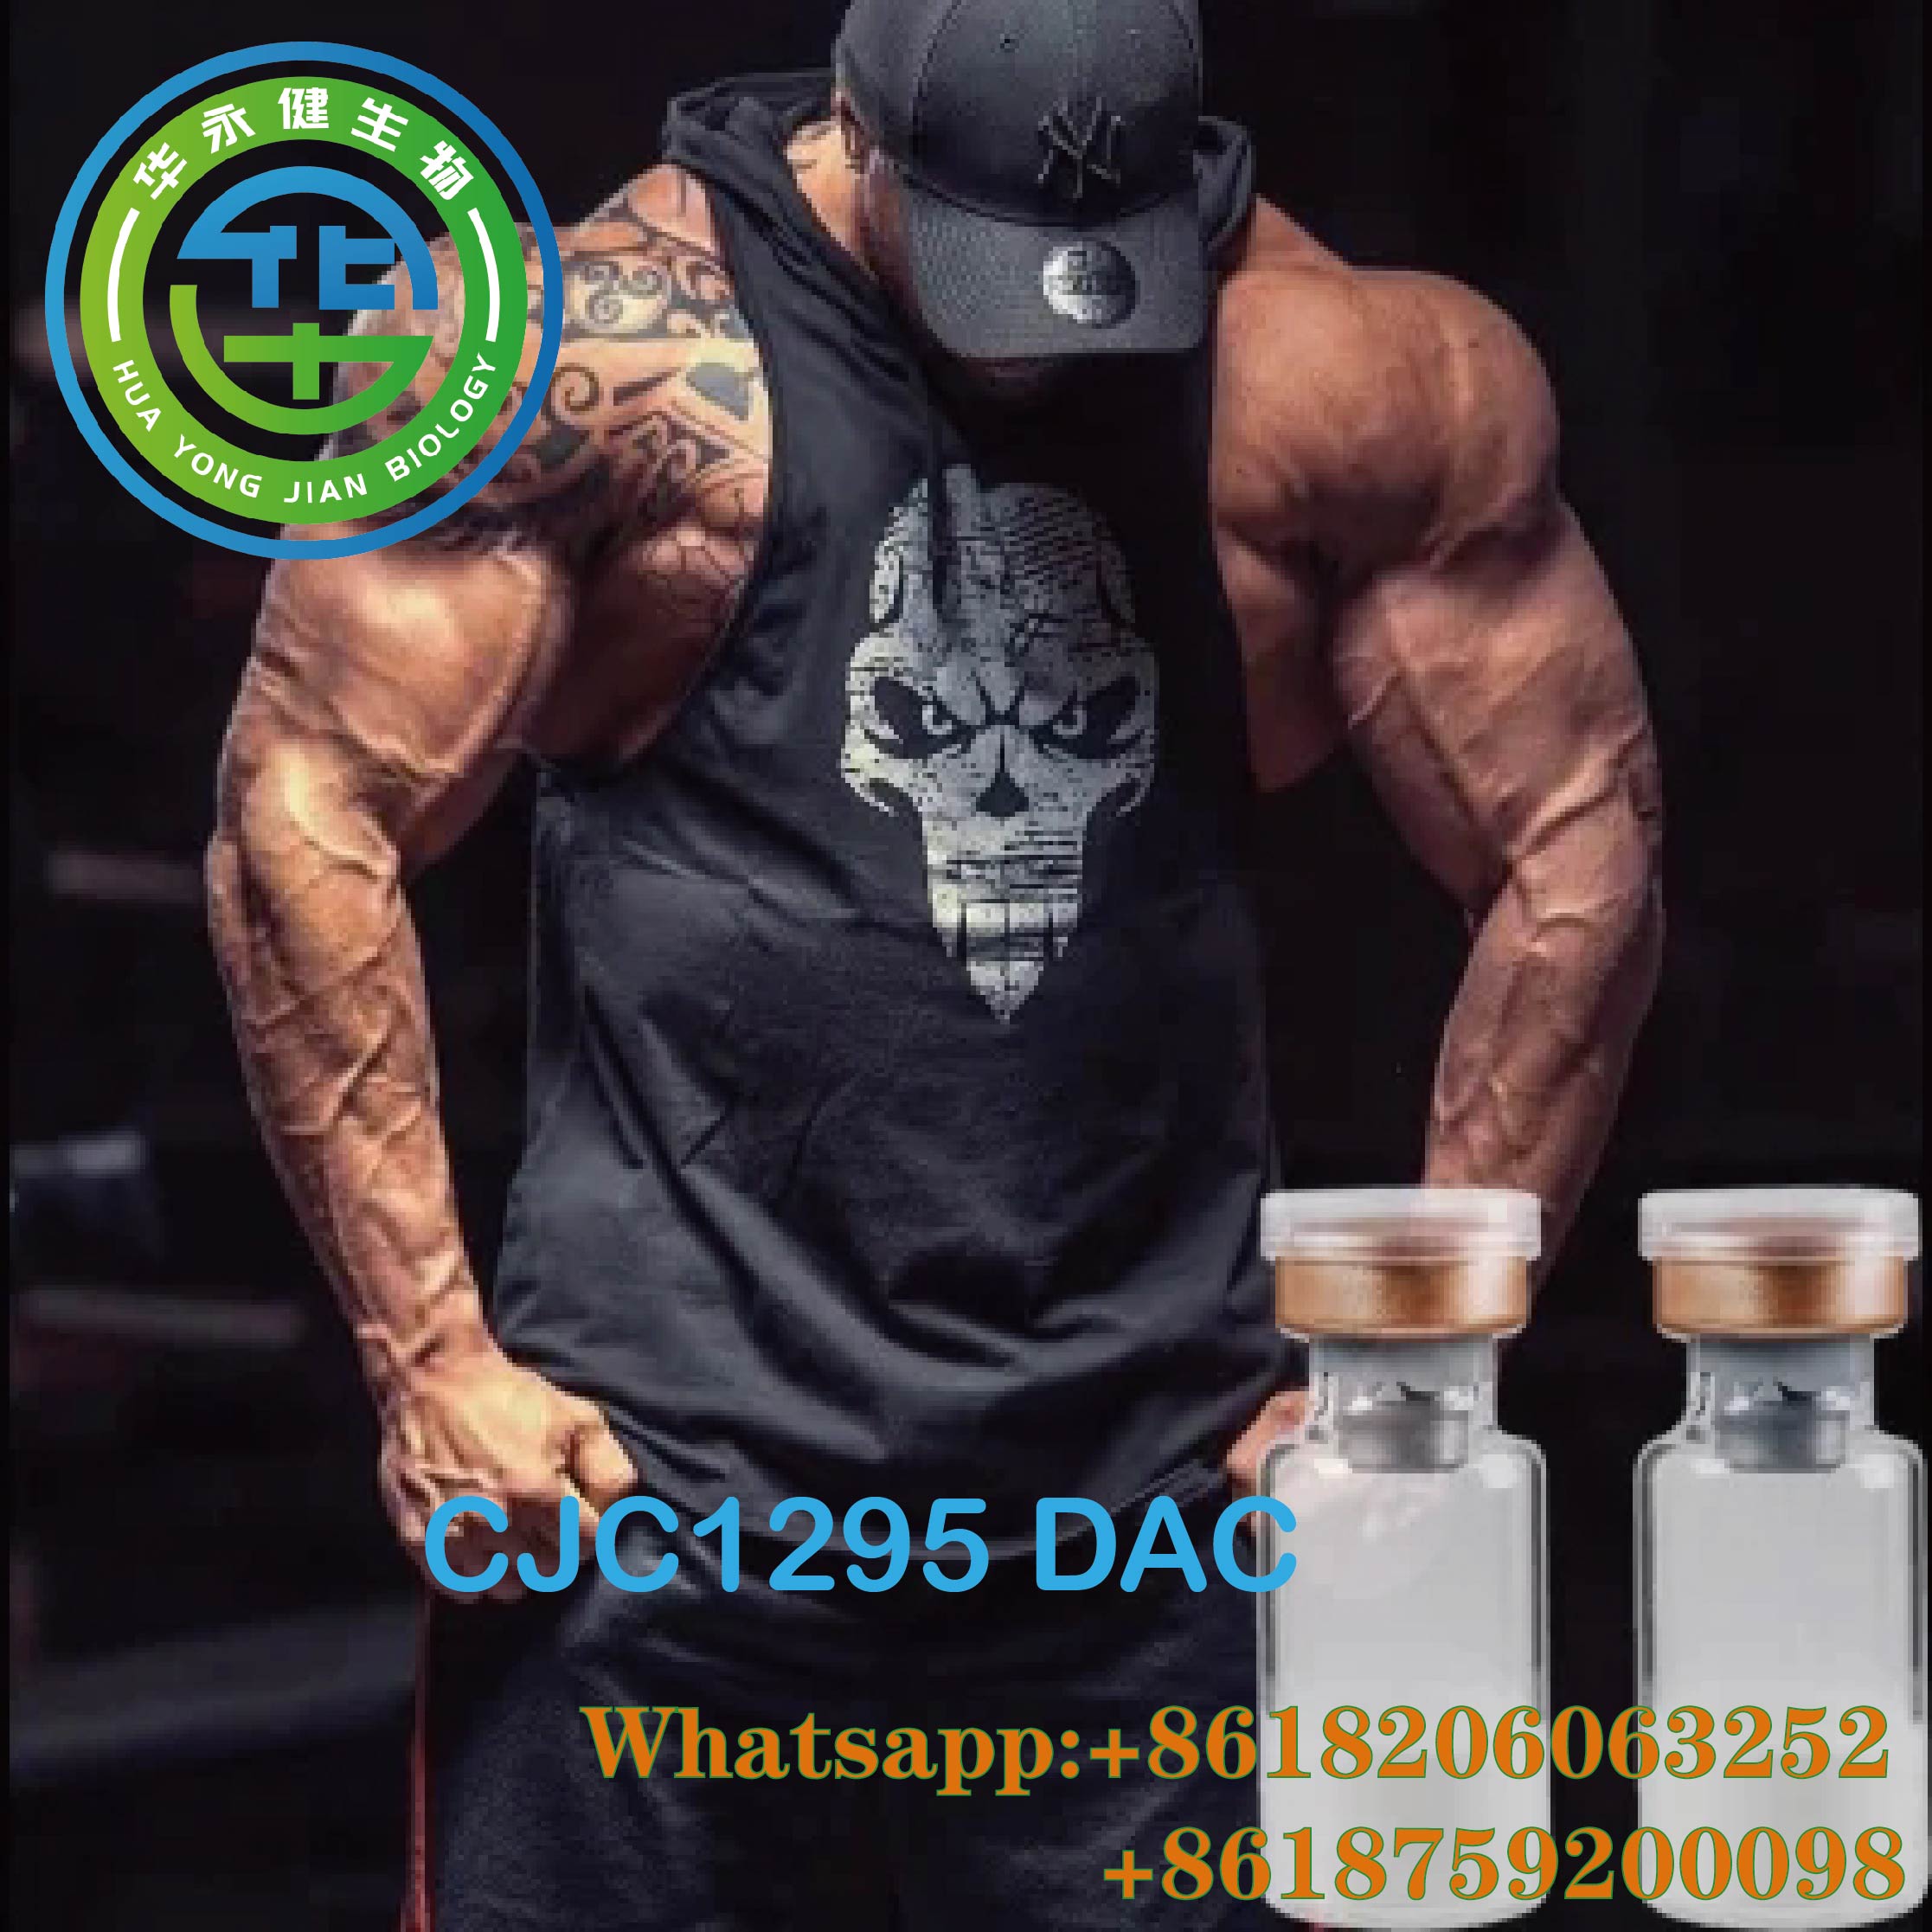 High Quality  Raw Oil  Steroids Powder CJC1295 (CJC1295 without DAC) Peptides Vials for Bodybuilding